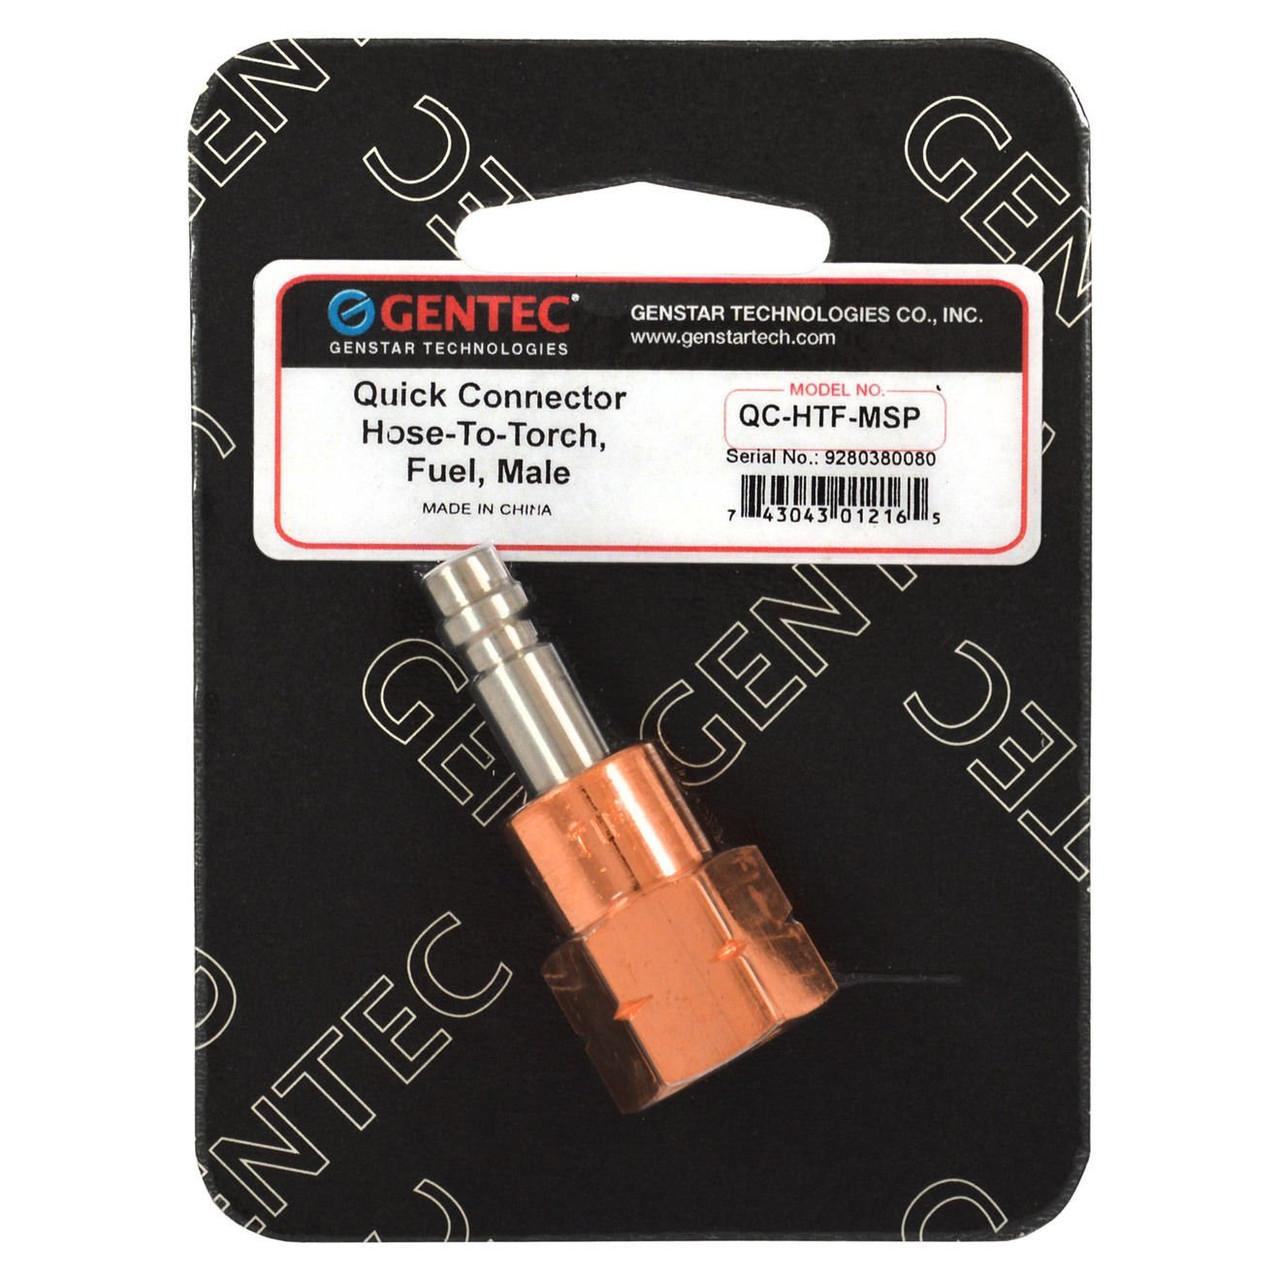 Gentec Quick Connector Hose to torch fuel Male 